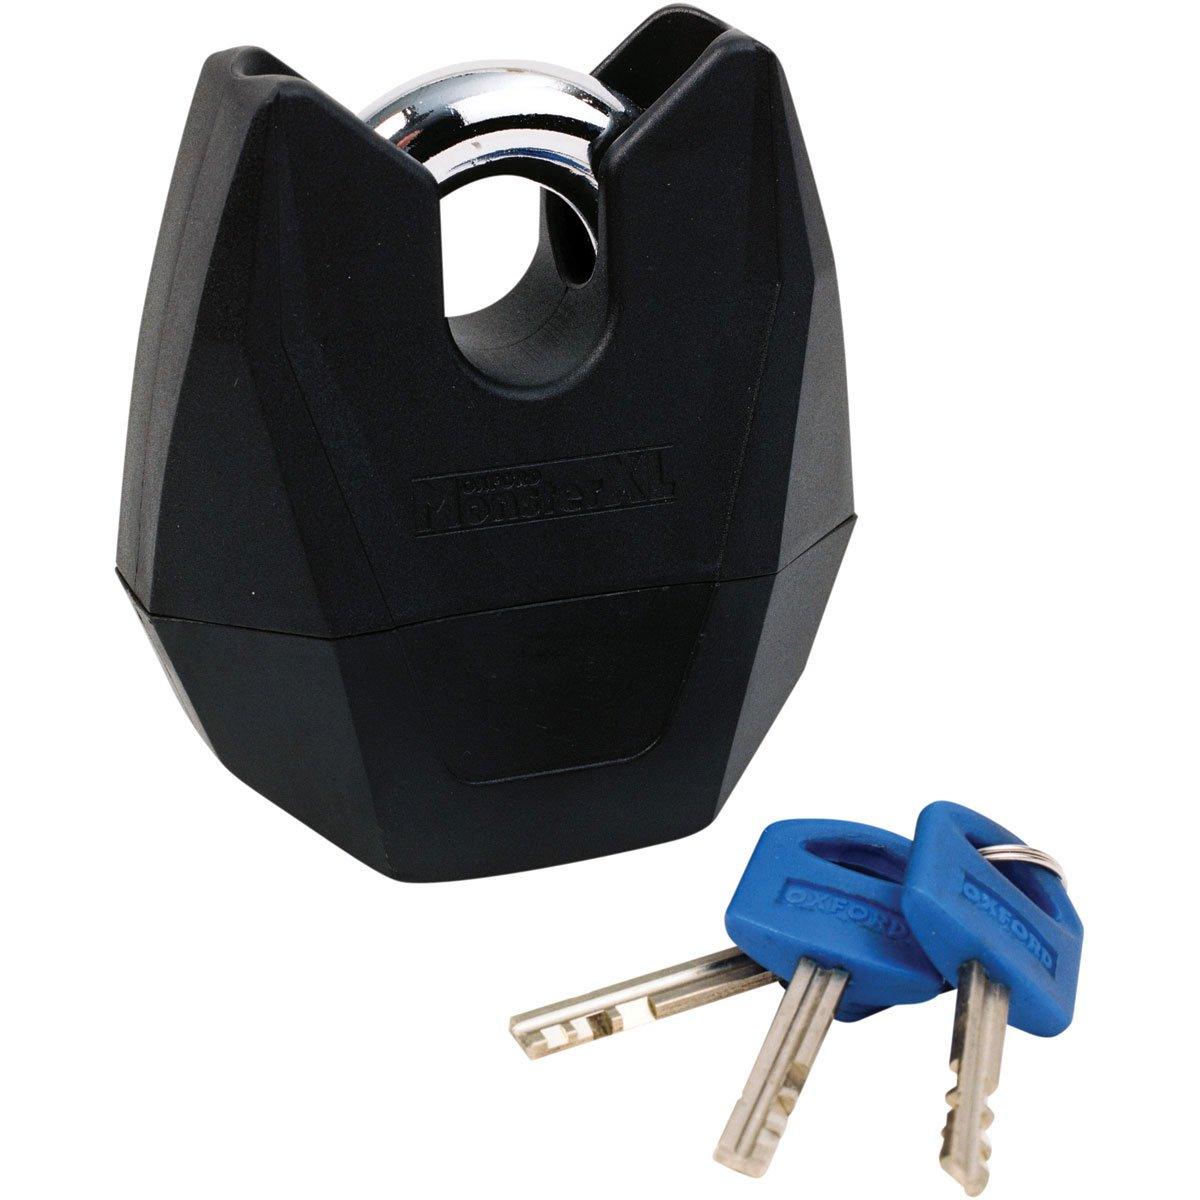 Oxford Monster XL Ultra Strong Padlock - 16mm Shackle